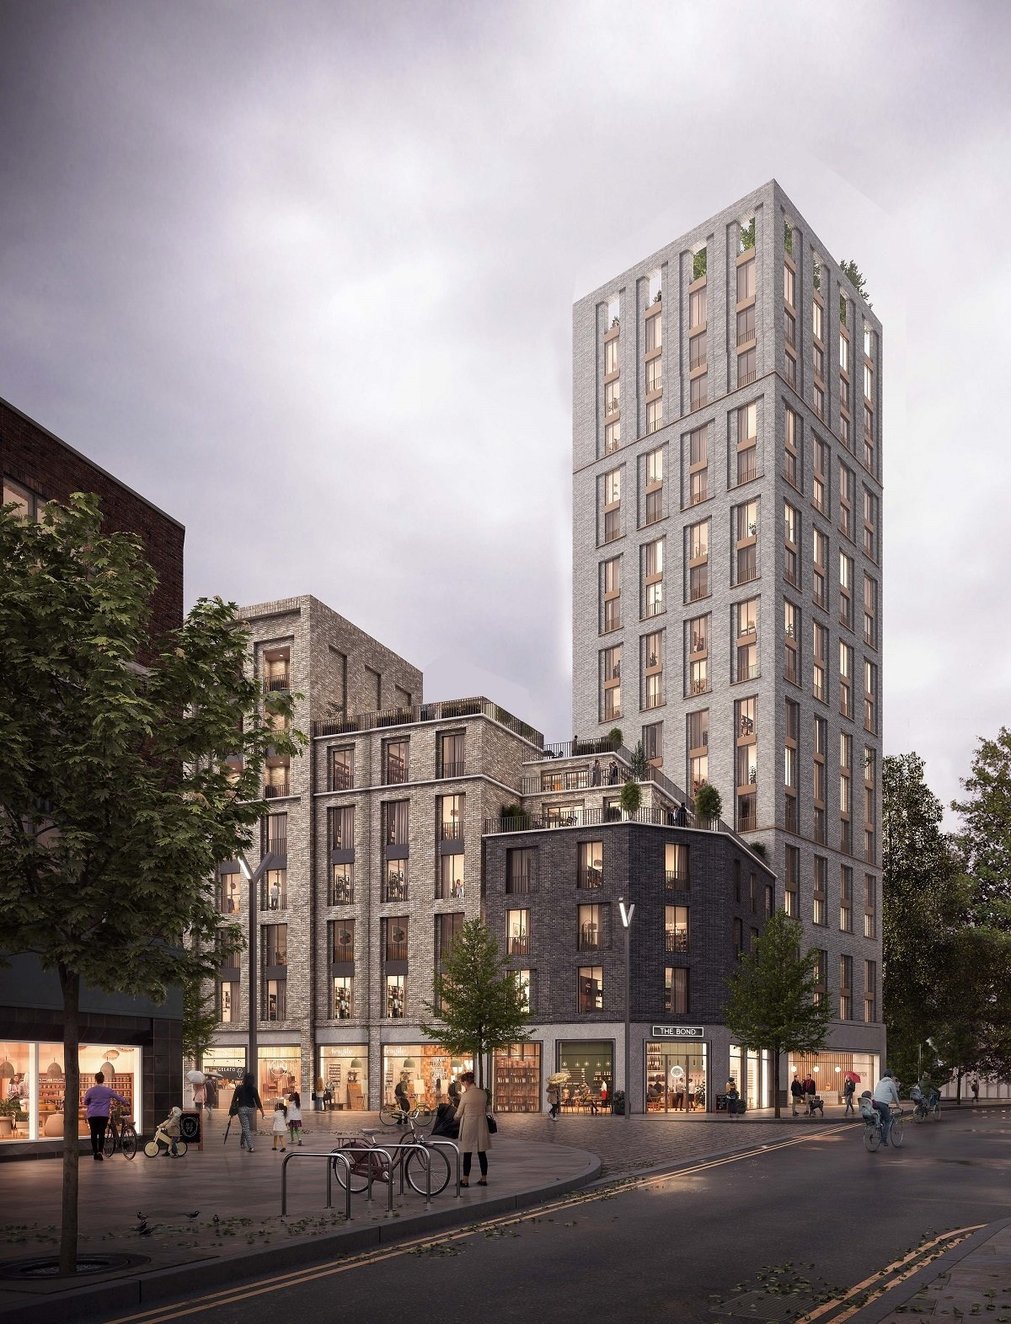 Albion Square: Demolition to pave way for regeneration project